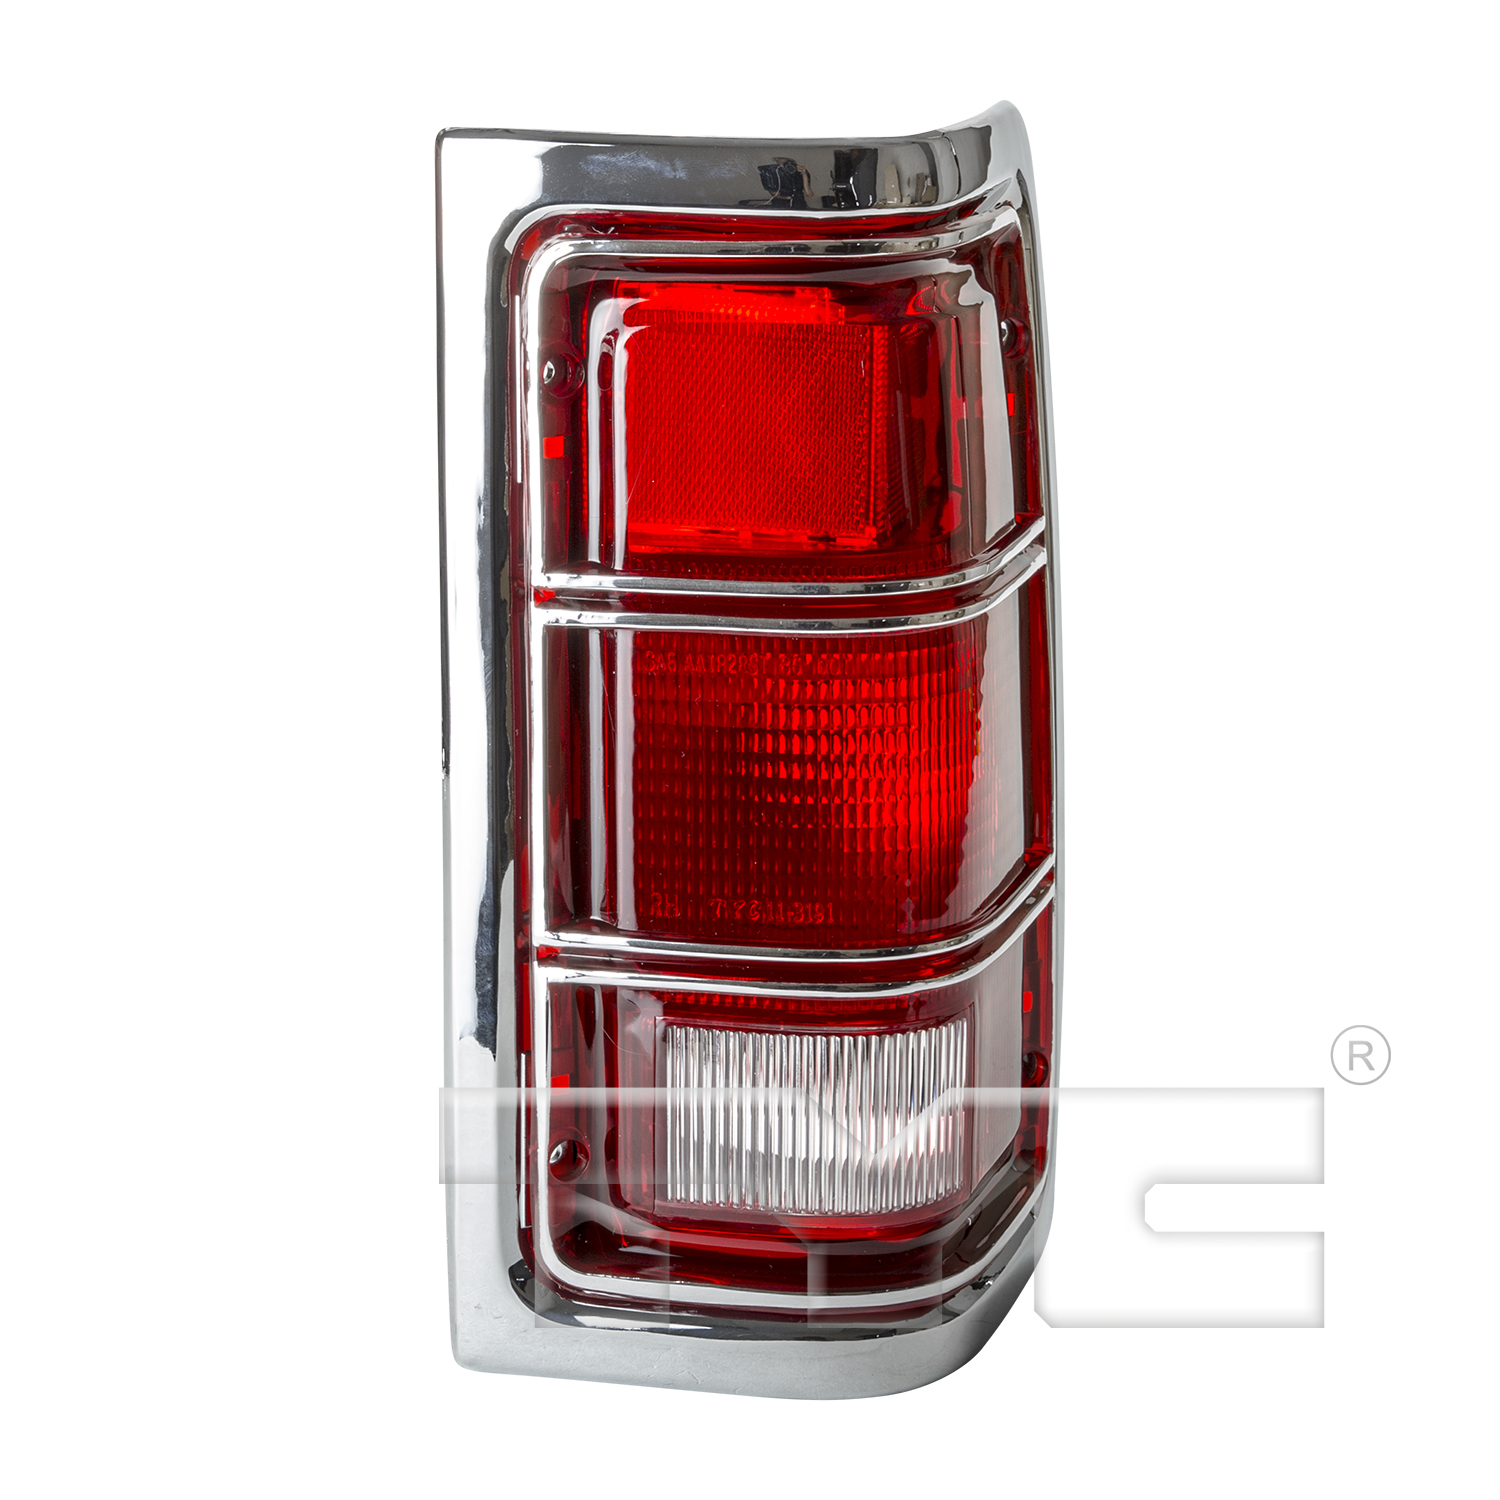 Aftermarket TAILLIGHTS for DODGE - W350, W350,81-87,RT Taillamp lens